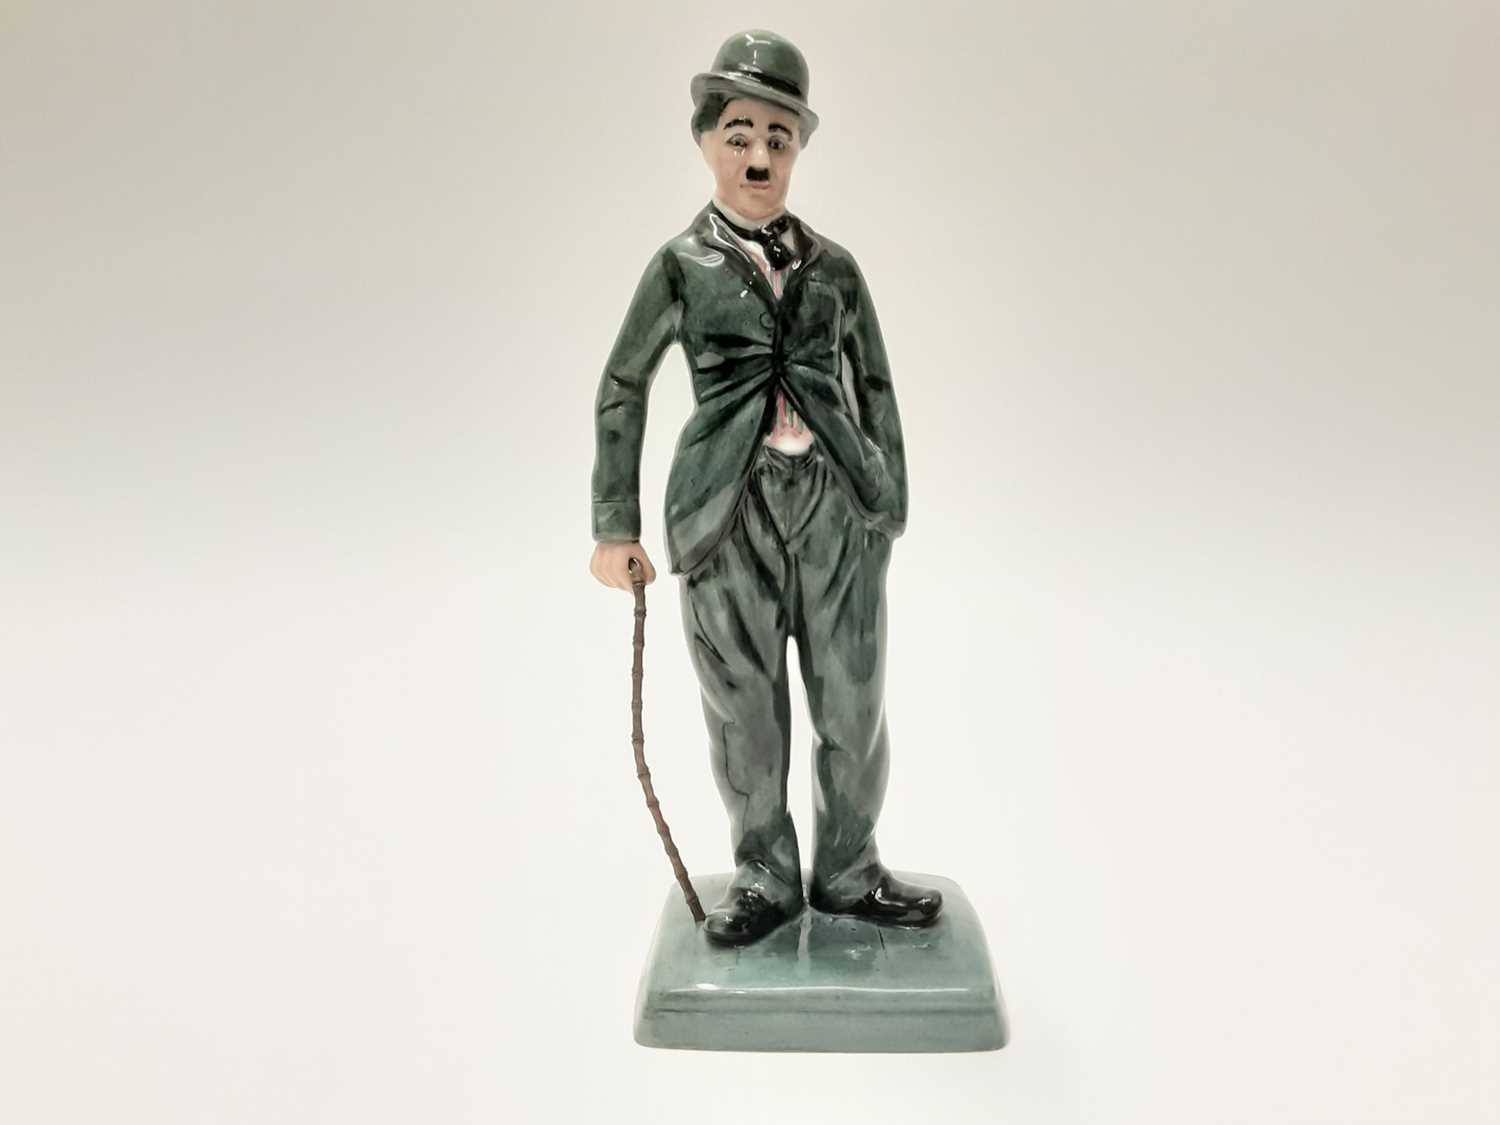 Lot 20 - Royal Doulton limited edition figure - Charlie Chaplin HN2771, number 2812 of 5000